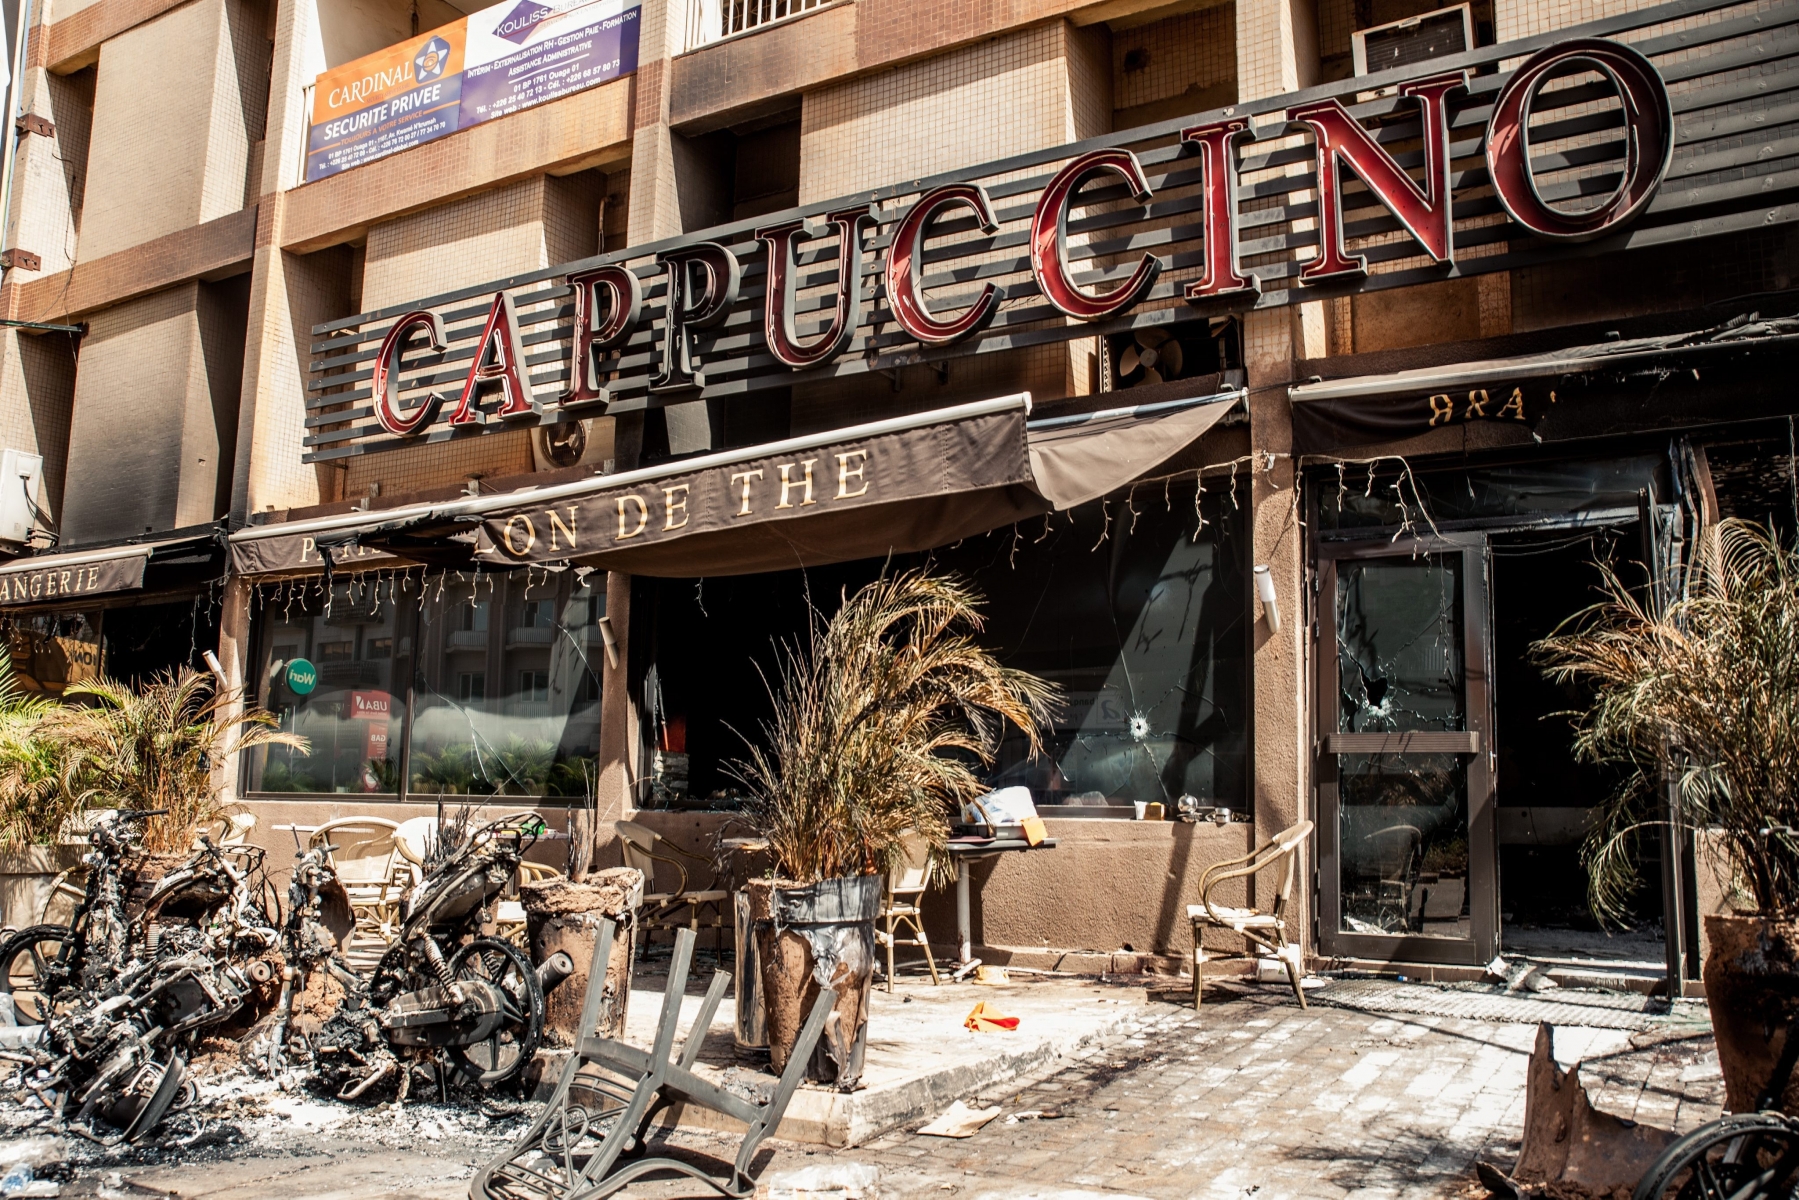 epa05109170 A general view of damaged outside of the Cappuccino bar opposite the Splendid Hotel in Ouagadougou, Burkina Faso 18 January 2016. According to media reports at least 28 people from 18 nationalities were killed after Islamist militants attacked The Splendid Hotel frequented by many westeners in Burkina Faso the evening of 15 January 2016. A joint operation by French and Burkina Faso forces freed many hostages on 16 January 2016. Al-Qaeda in the Islamic Maghreb (AQIM) claimed responsibility.  EPA/WOUTER ELSEN BURKINA FASO SPLENDID HOTEL ATTACK AFTERMATH